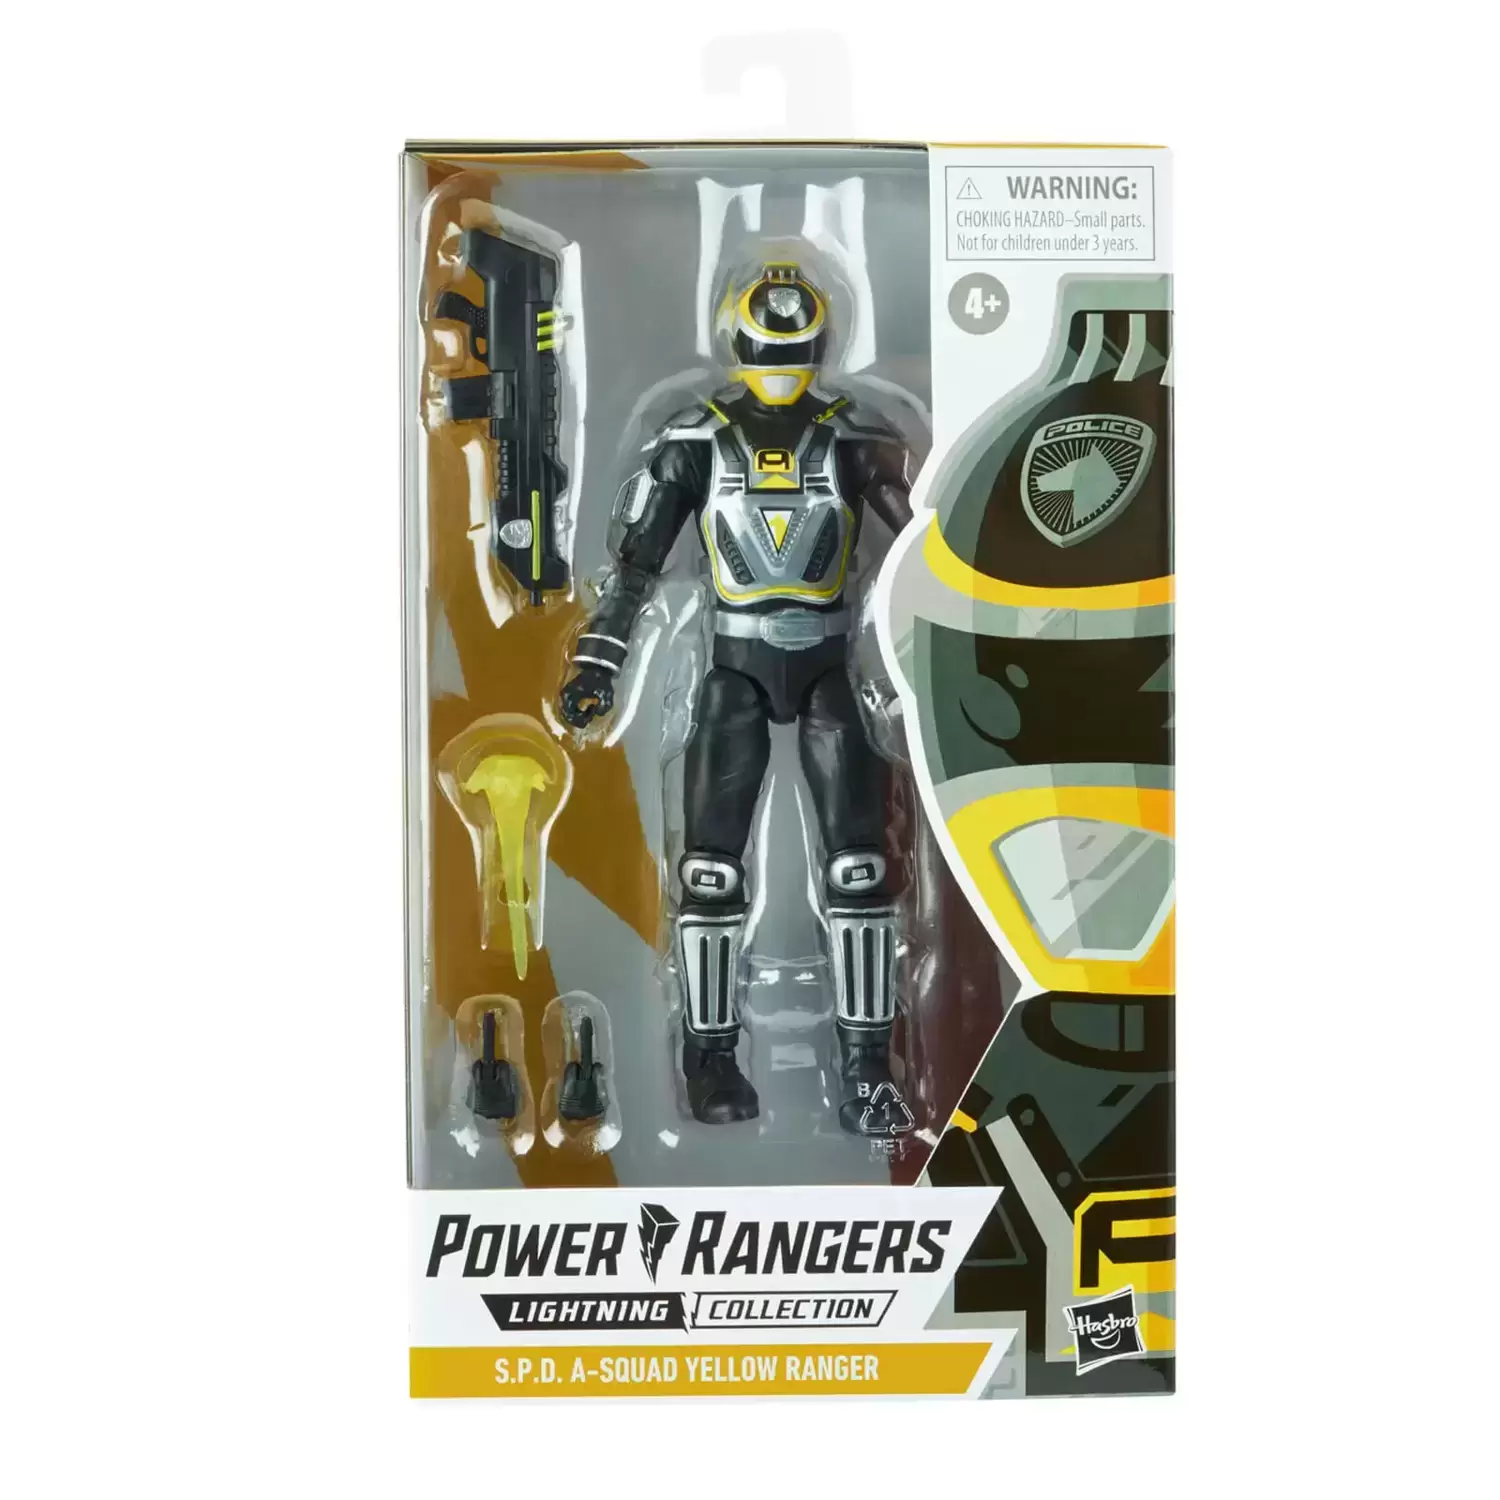 Power Rangers Hasbro - Lightning Collection - S.P.D. A-Squad Yellow Ranger